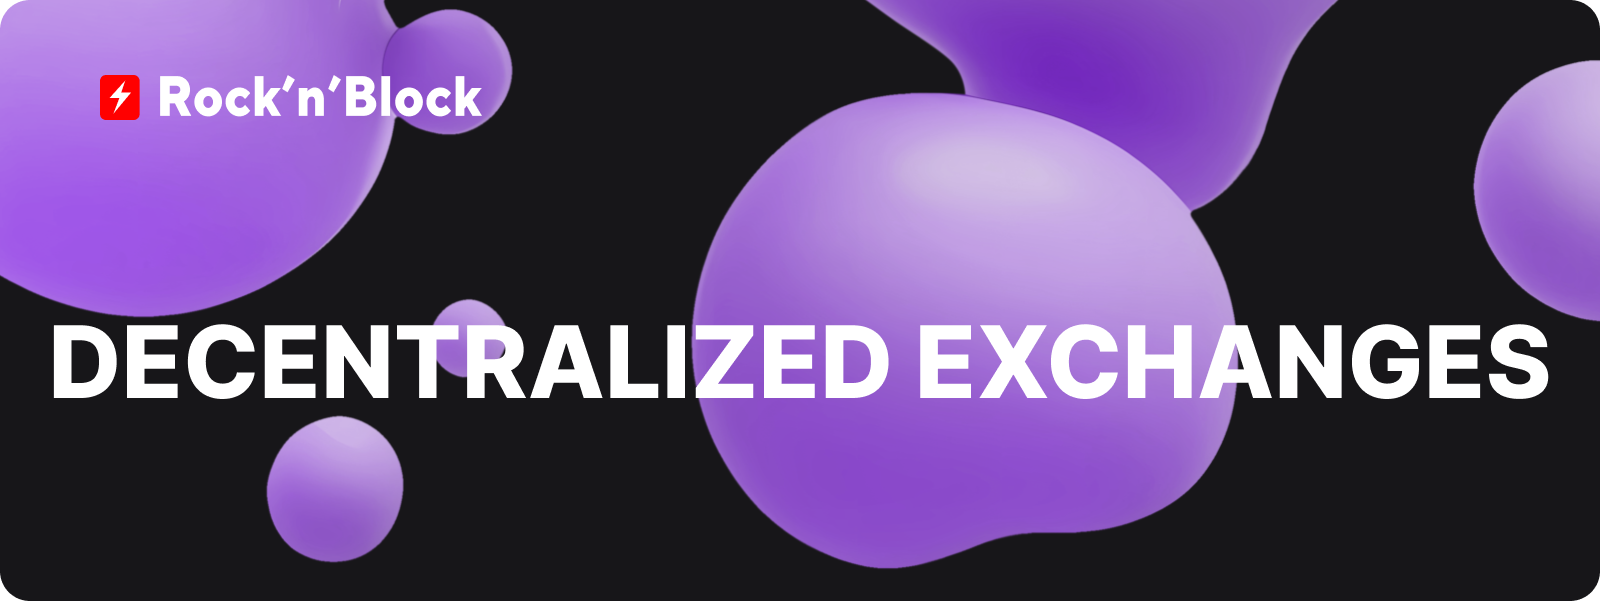 Decentralized cryptocurrency exchanges